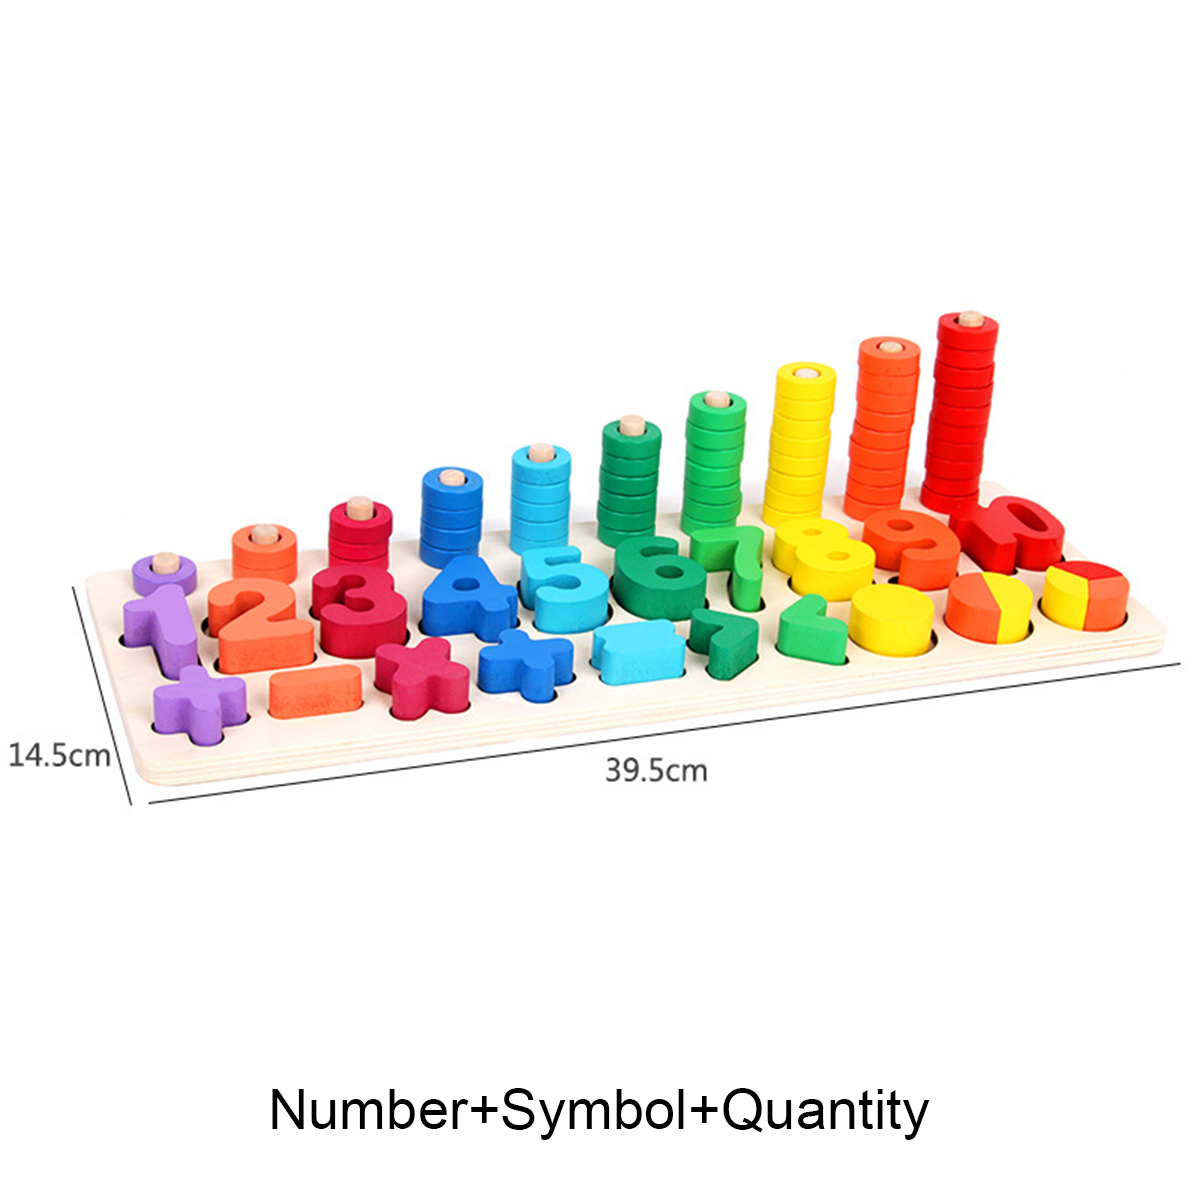 Children-Wooden-Montessori-Materials-Learning-To-Count-Numbers-Matching-Digital-Shape-Match-Early-Ed-1605437-9